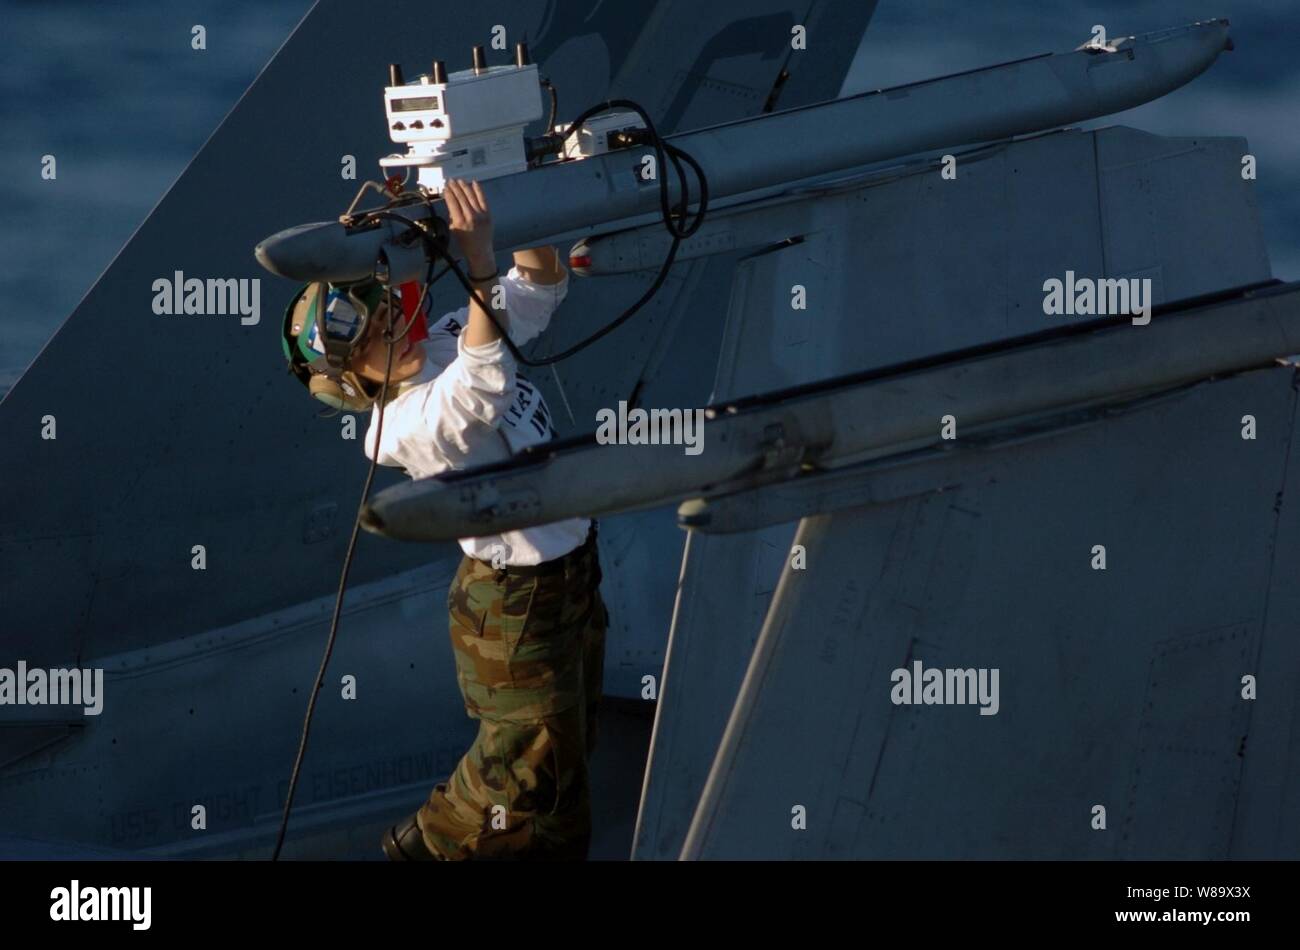 U.S. Navy Petty Officer 2nd Class Kimberly Clark performs a weapons system release and control check on an F/A-18C Hornet aircraft on the flight deck of the aircraft carrier USS Dwight D. Eisenhower (CVN 69) underway in the Atlantic Ocean on Jan. 10, 2009.  Military personnel aboard the ship are participating in a composite unit training exercise that tests a Navy Carrier Strike Group's capabilities before it is deployed. Stock Photo